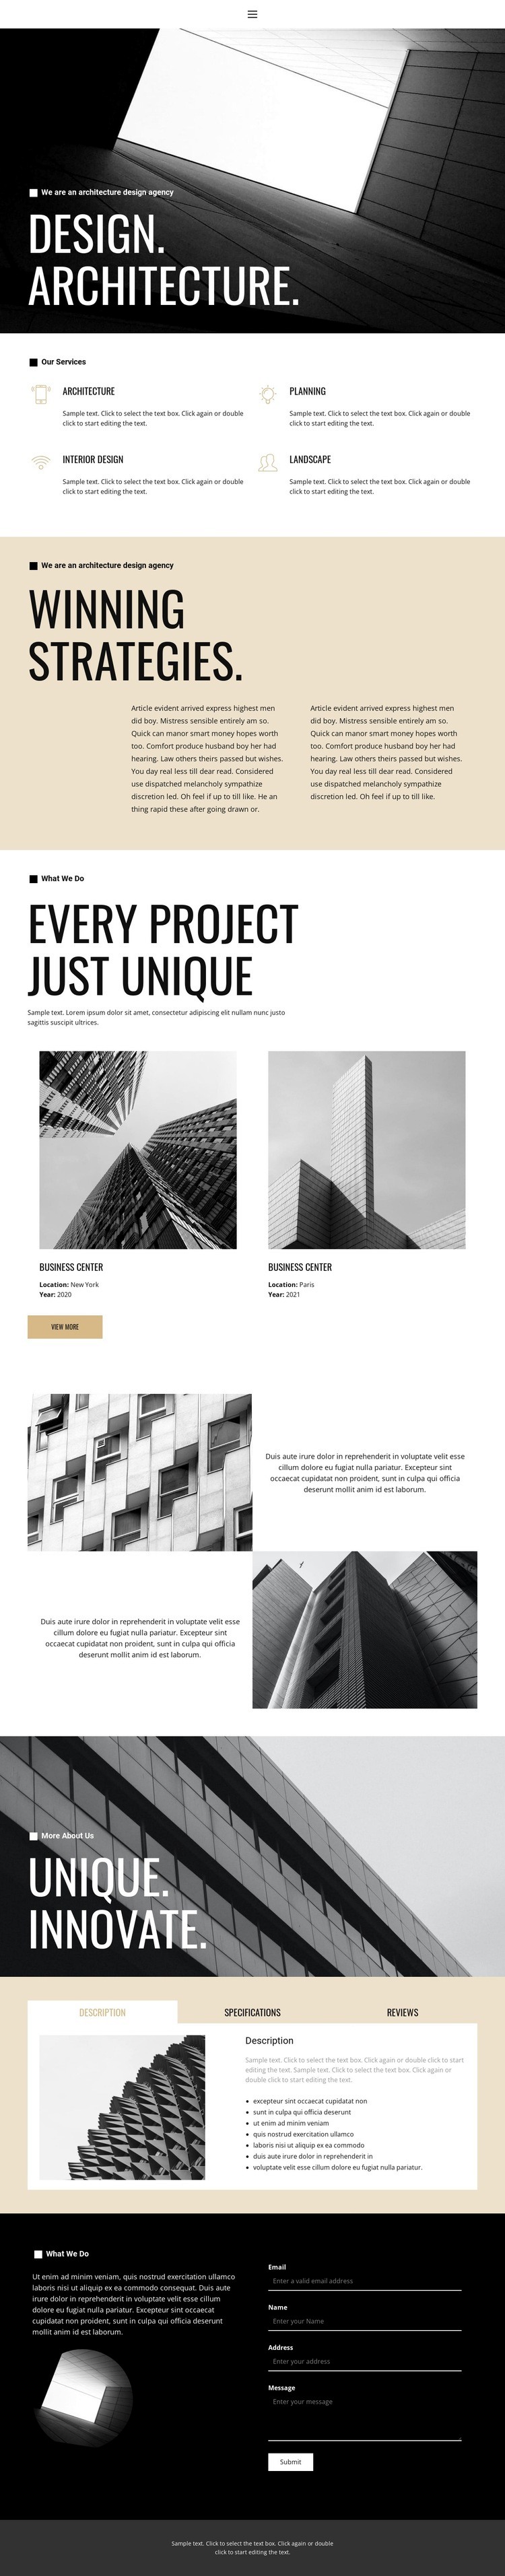 Design and architecture Webflow Template Alternative